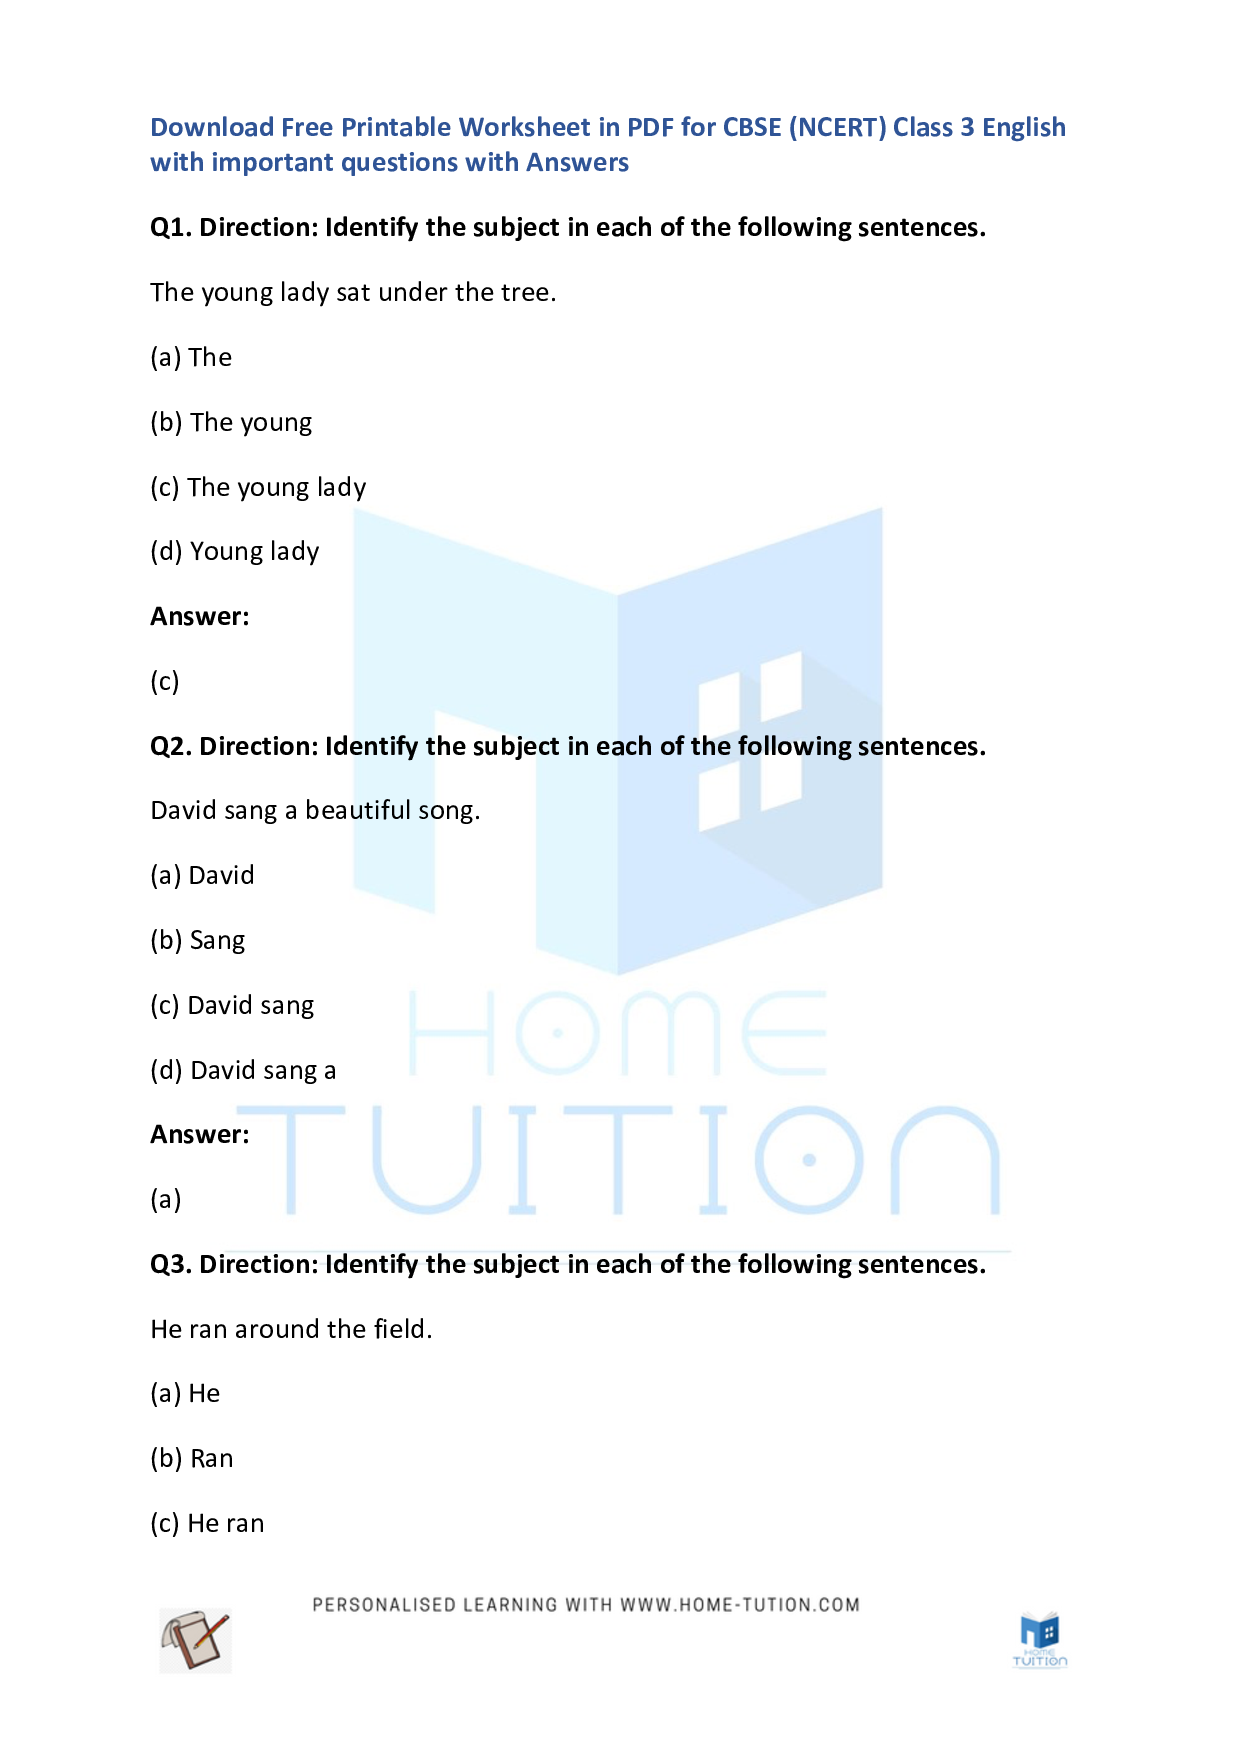 CBSE Class 3 English, English Sentences Worksheet with Answers - Download Free Printable PDF